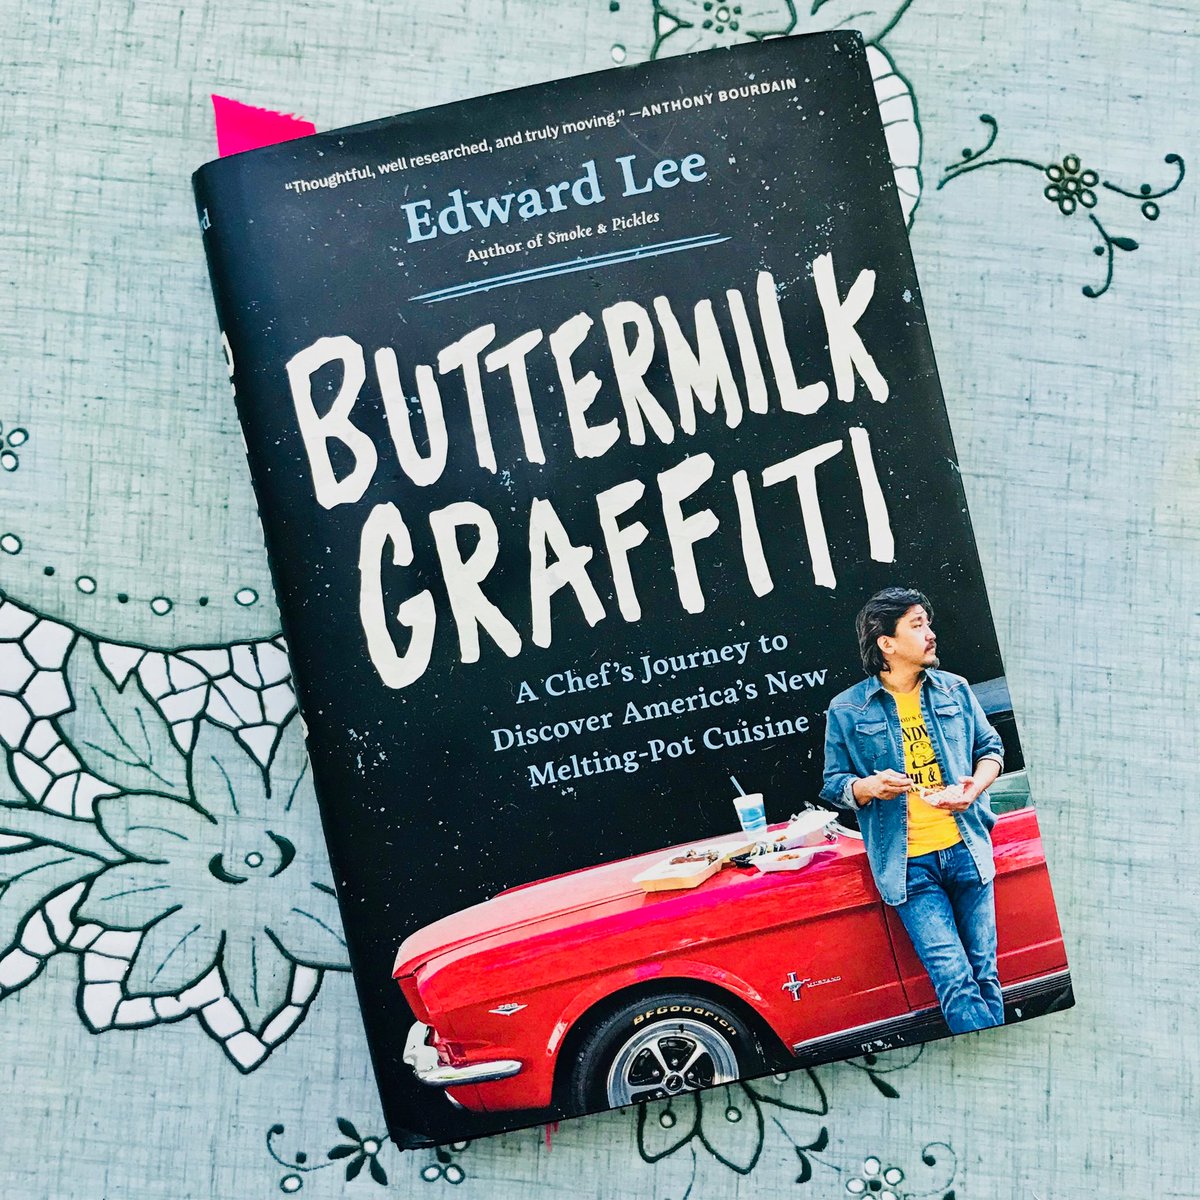 Spent the better part of the weekend with this magnificent read. Kudos ⁦@chefedwardlee⁩ on what is easily some of the best food writing I’ve encountered in ages. Remarkable.  #buttermilkgraffiti